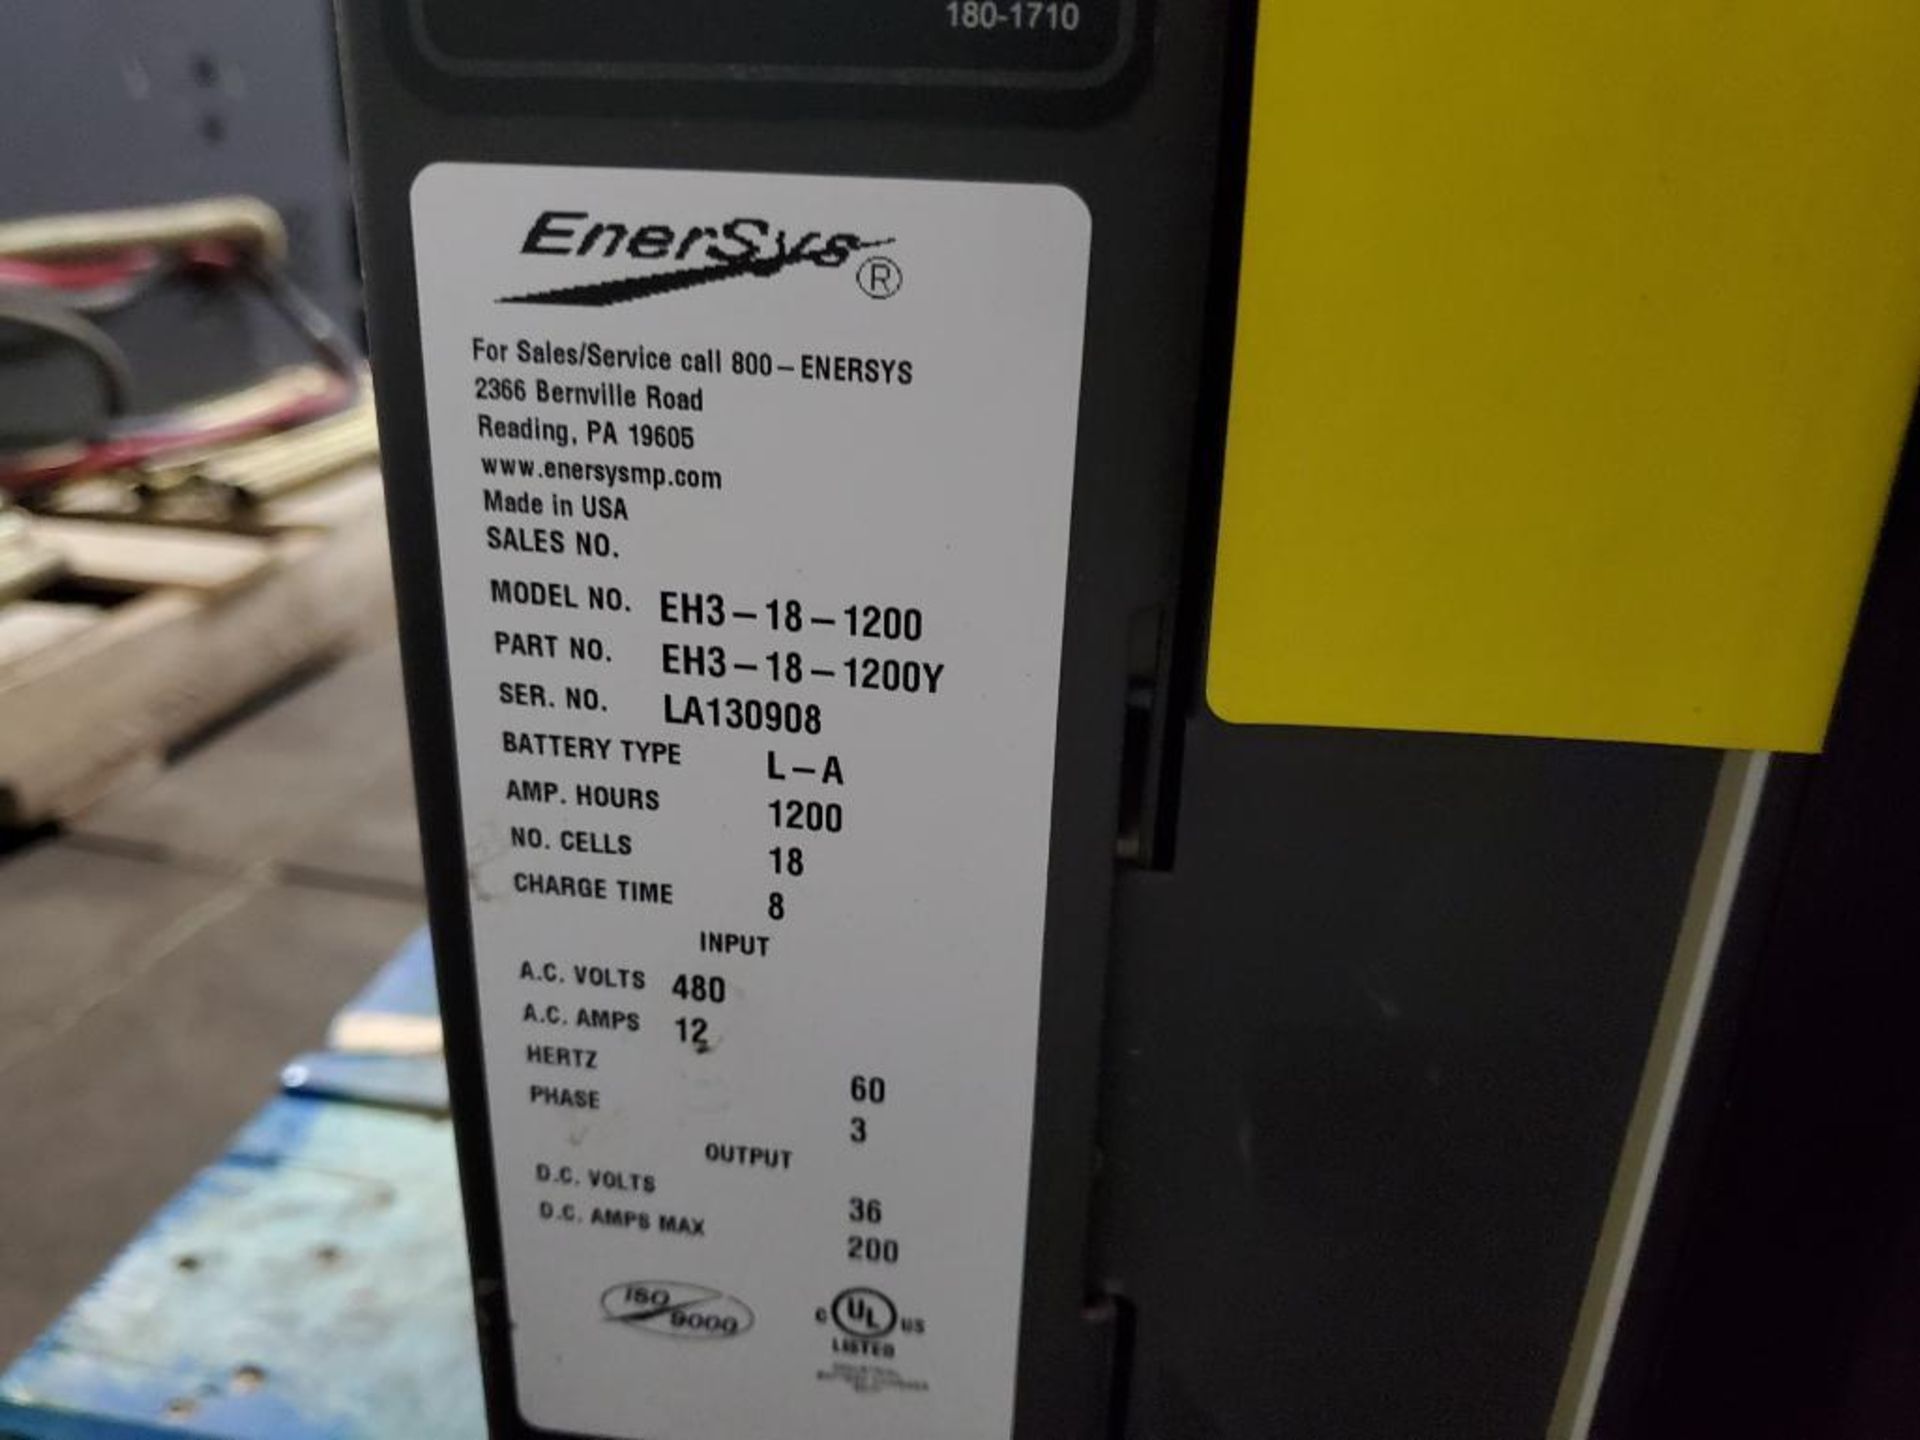 (2x) EnerSys EnForcer Battery Chargers, Model EH3-18-1200, Input: 480V, 3-Phase, Output: 36V, 200 Am - Image 3 of 4